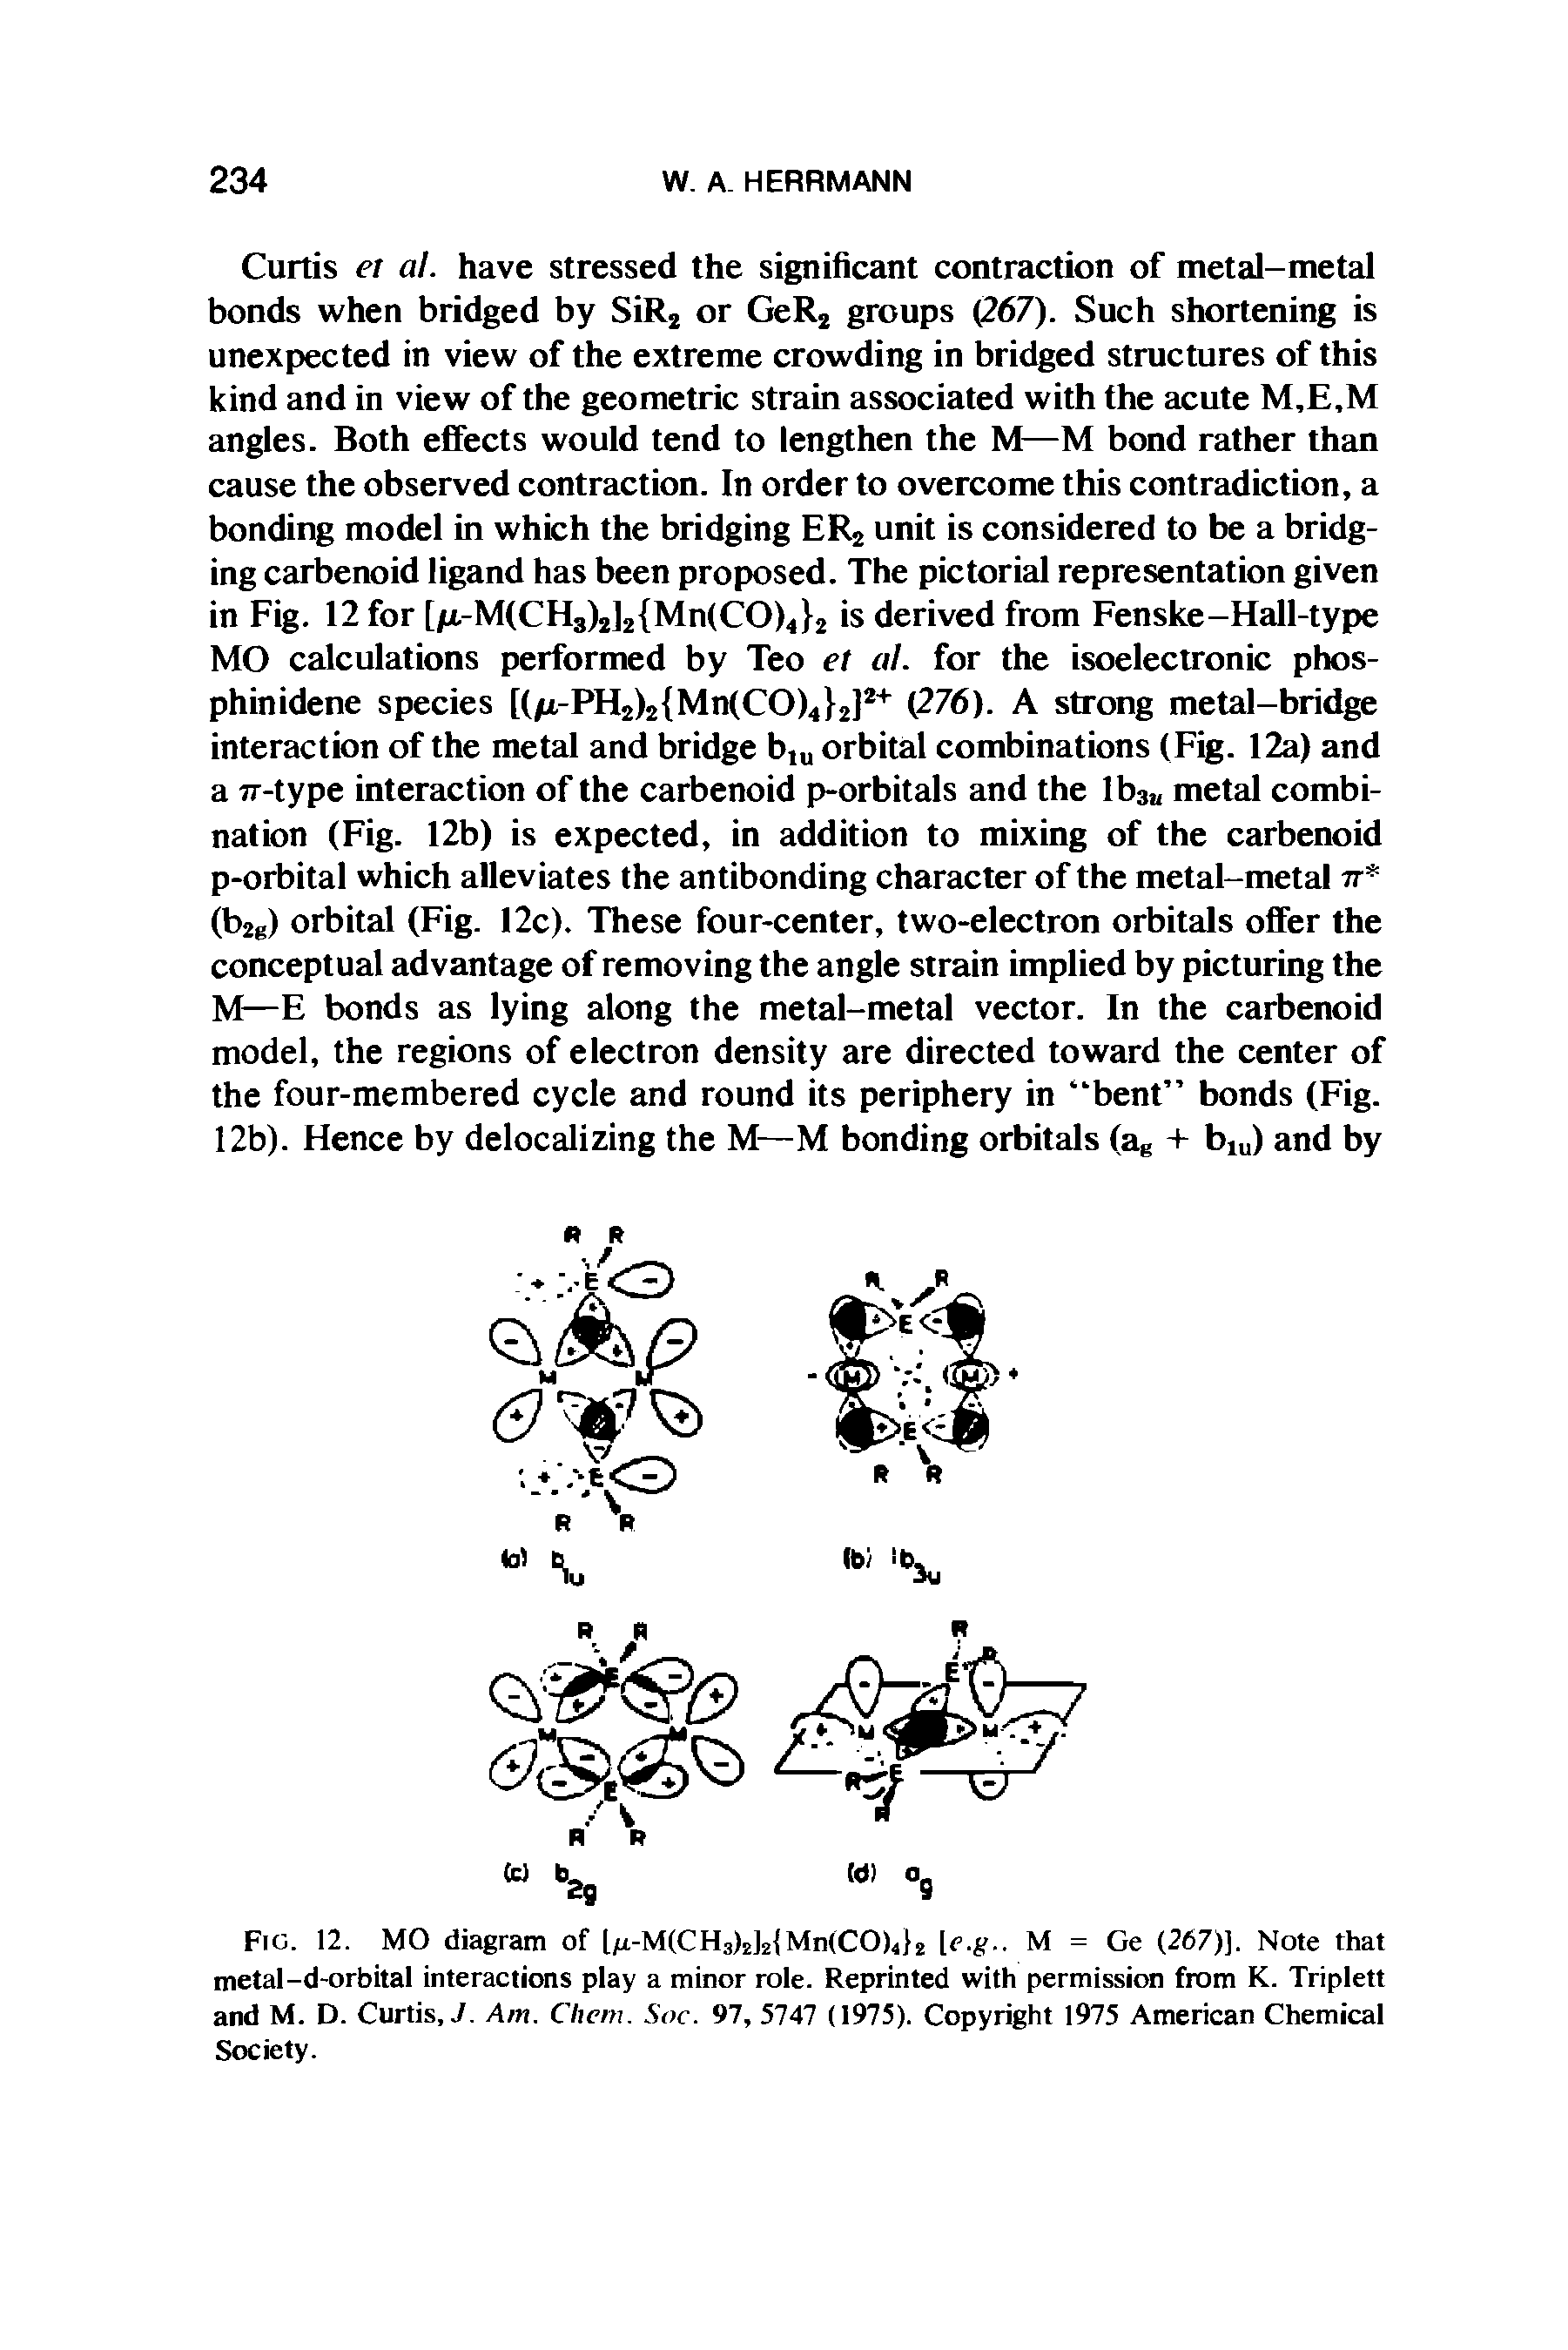 Fig. 12. MO diagram of Im-M(CH3)2J2 Mn(CO) 2 [e.g.. M = Ge (267)]. Note that metal-d-orbital interactions play a minor role. Reprinted with permission from K. Triplett and M. D. Curtis, J. Am. Chem. Soc. 97, 5747 (1975). Copyright 1975 American Chemical Society.